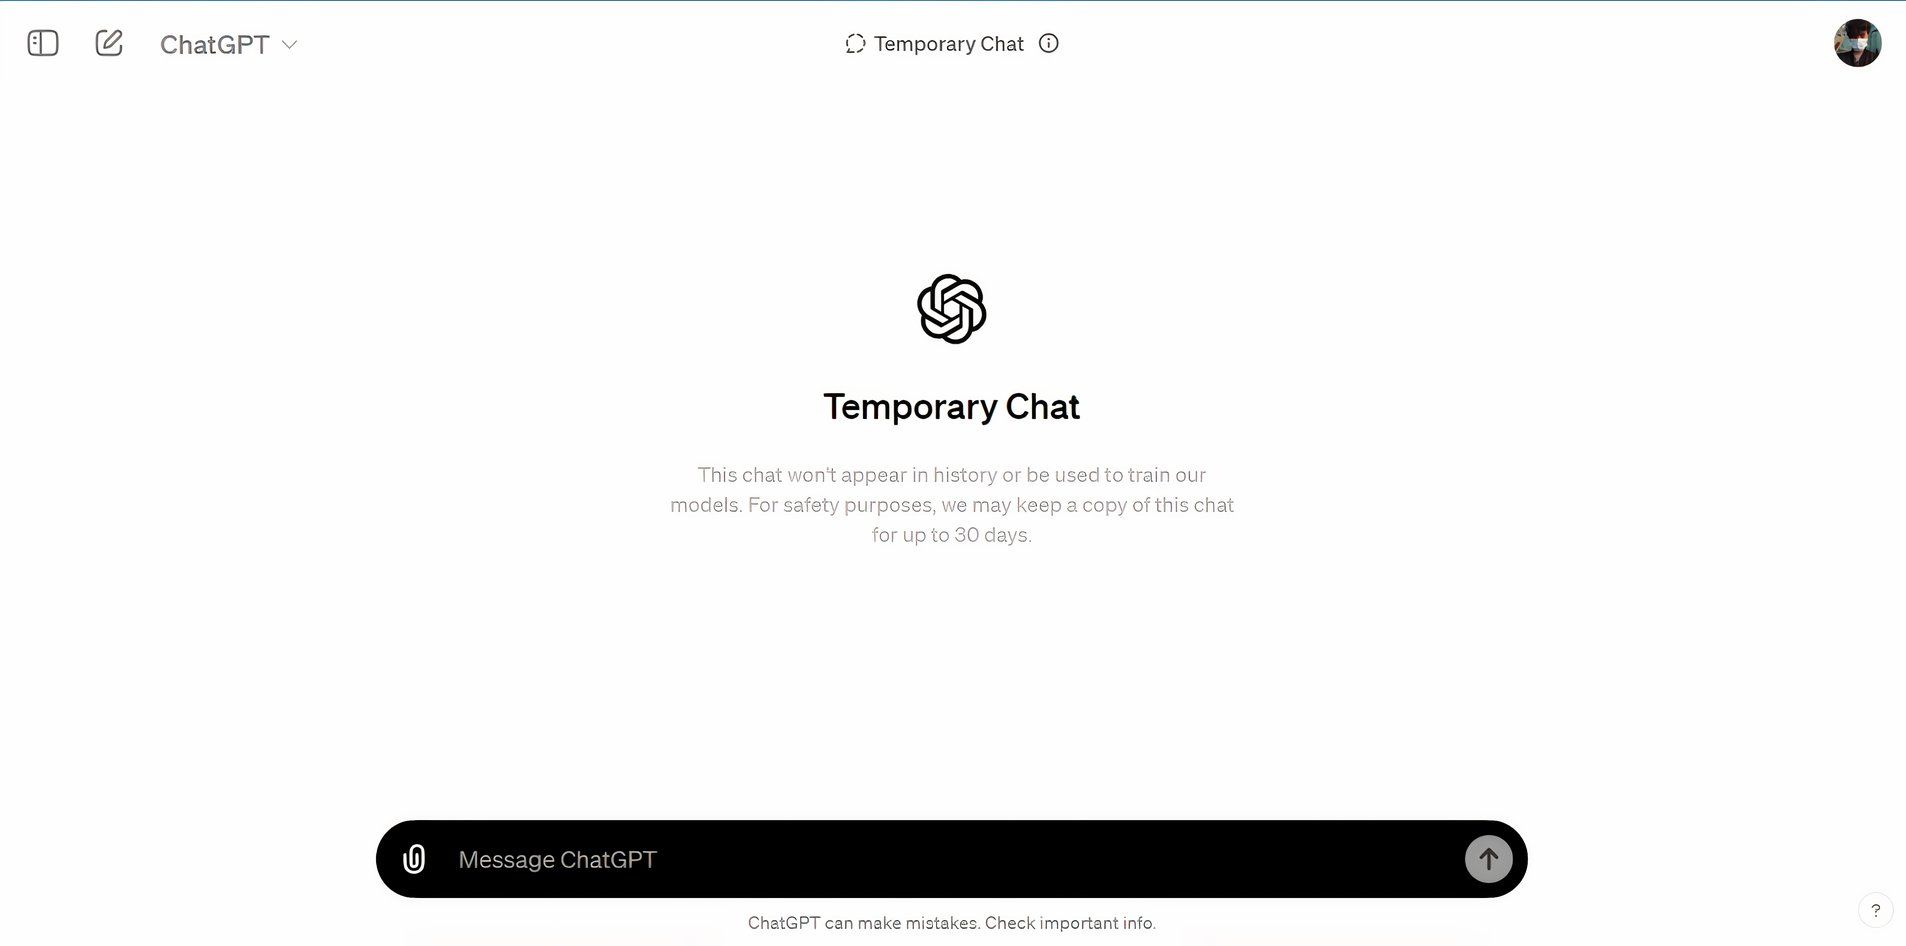 ChatGPT's new temporary chat feature